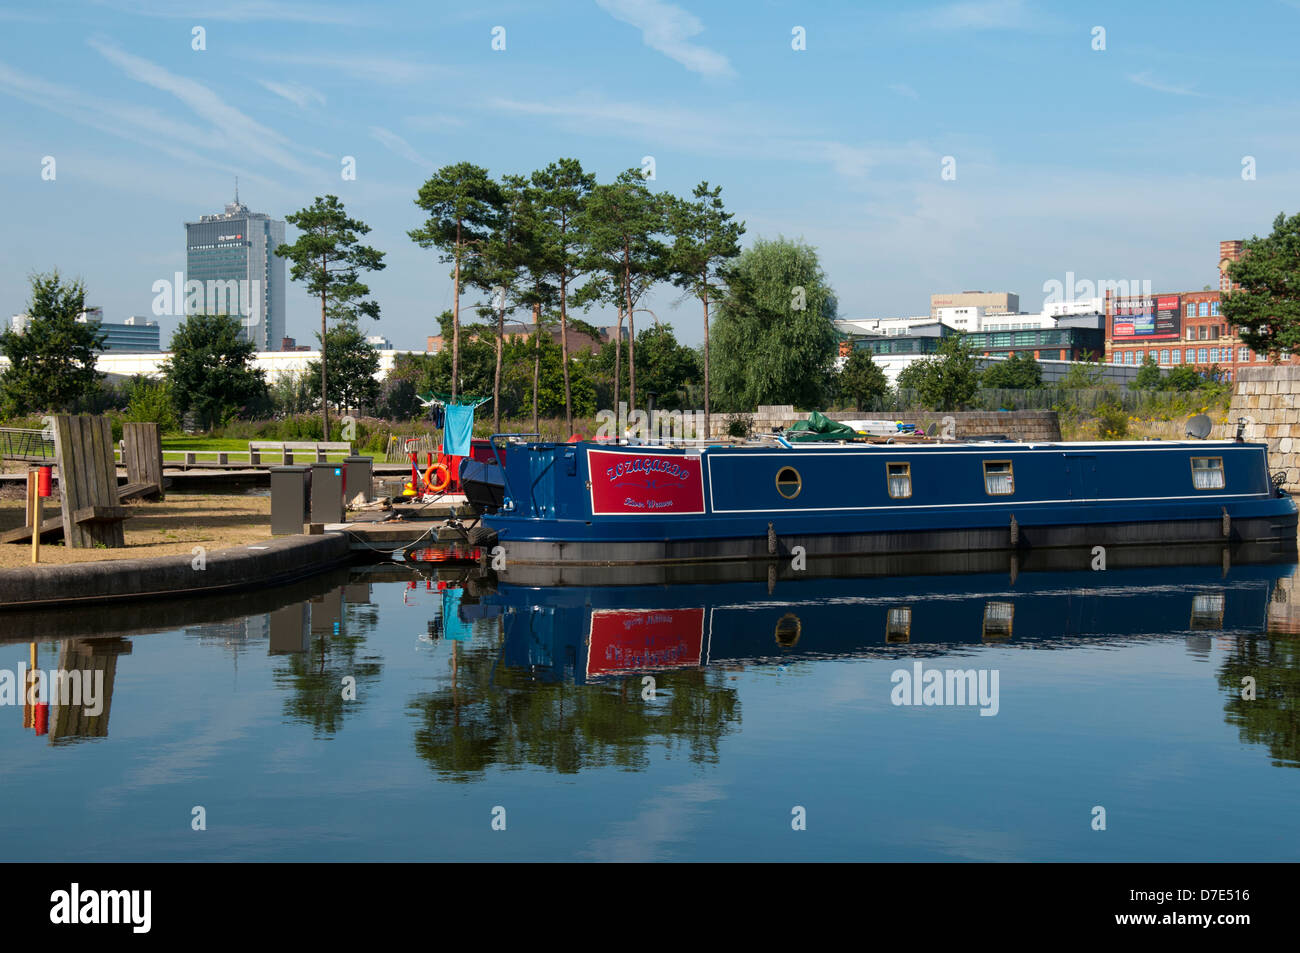 Canal narrowboat and trees reflected in the Cotton Field Park marina, New Islington, Ancoats, Manchester, England, UK. City Tower in the background. Stock Photo